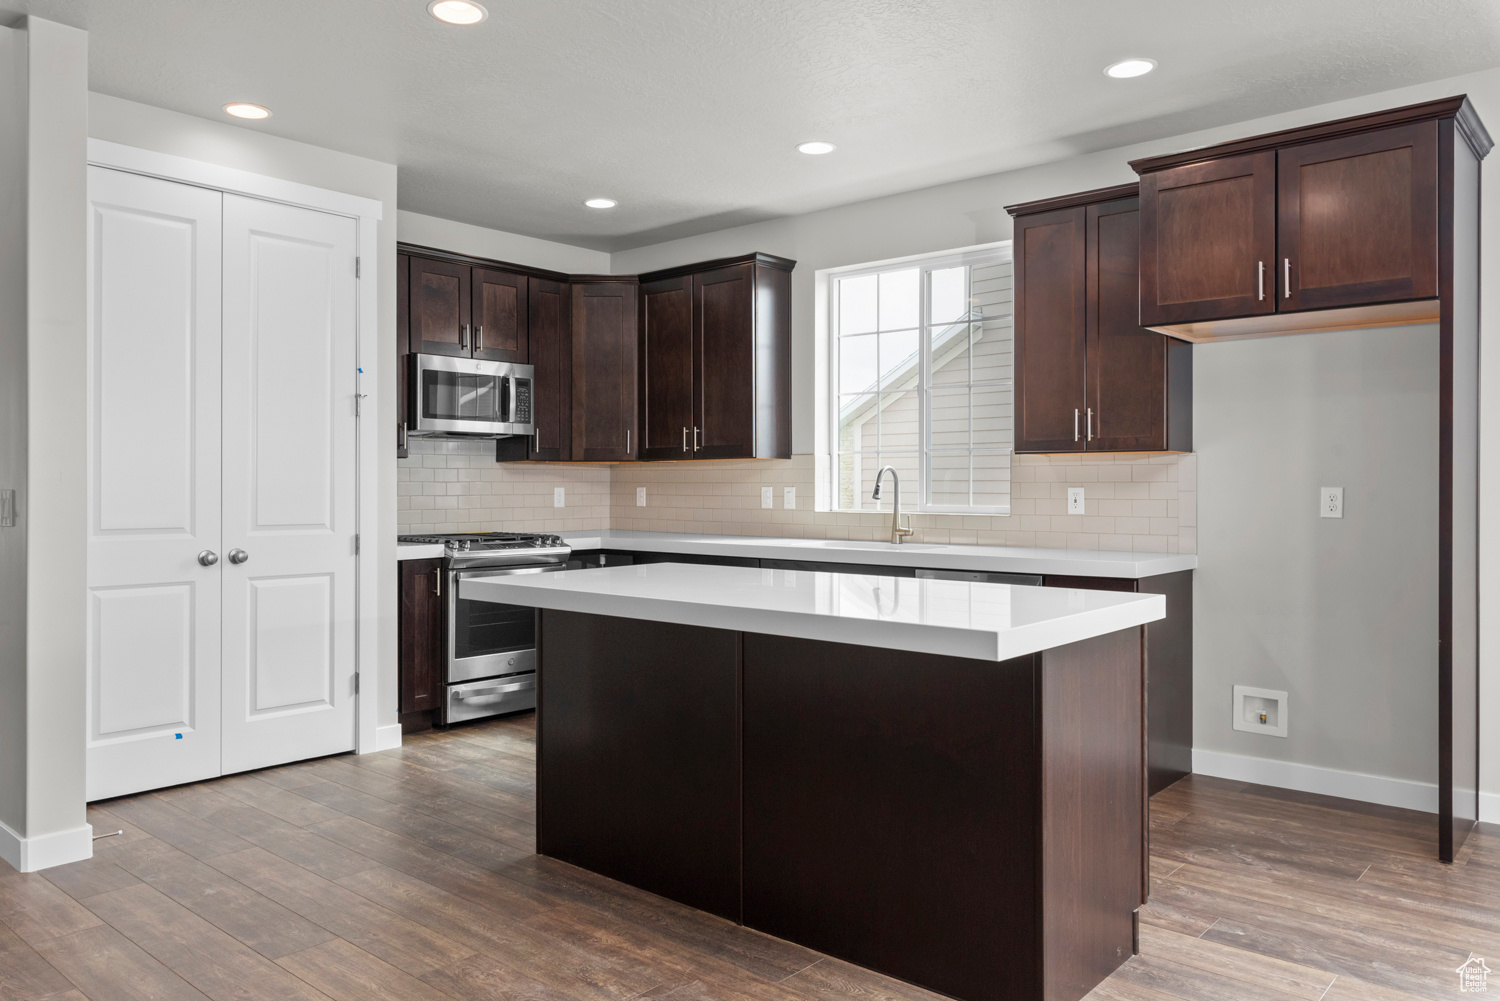 Kitchen with appliances with stainless steel finishes, a center island, hardwood / wood-style flooring, and tasteful backsplash